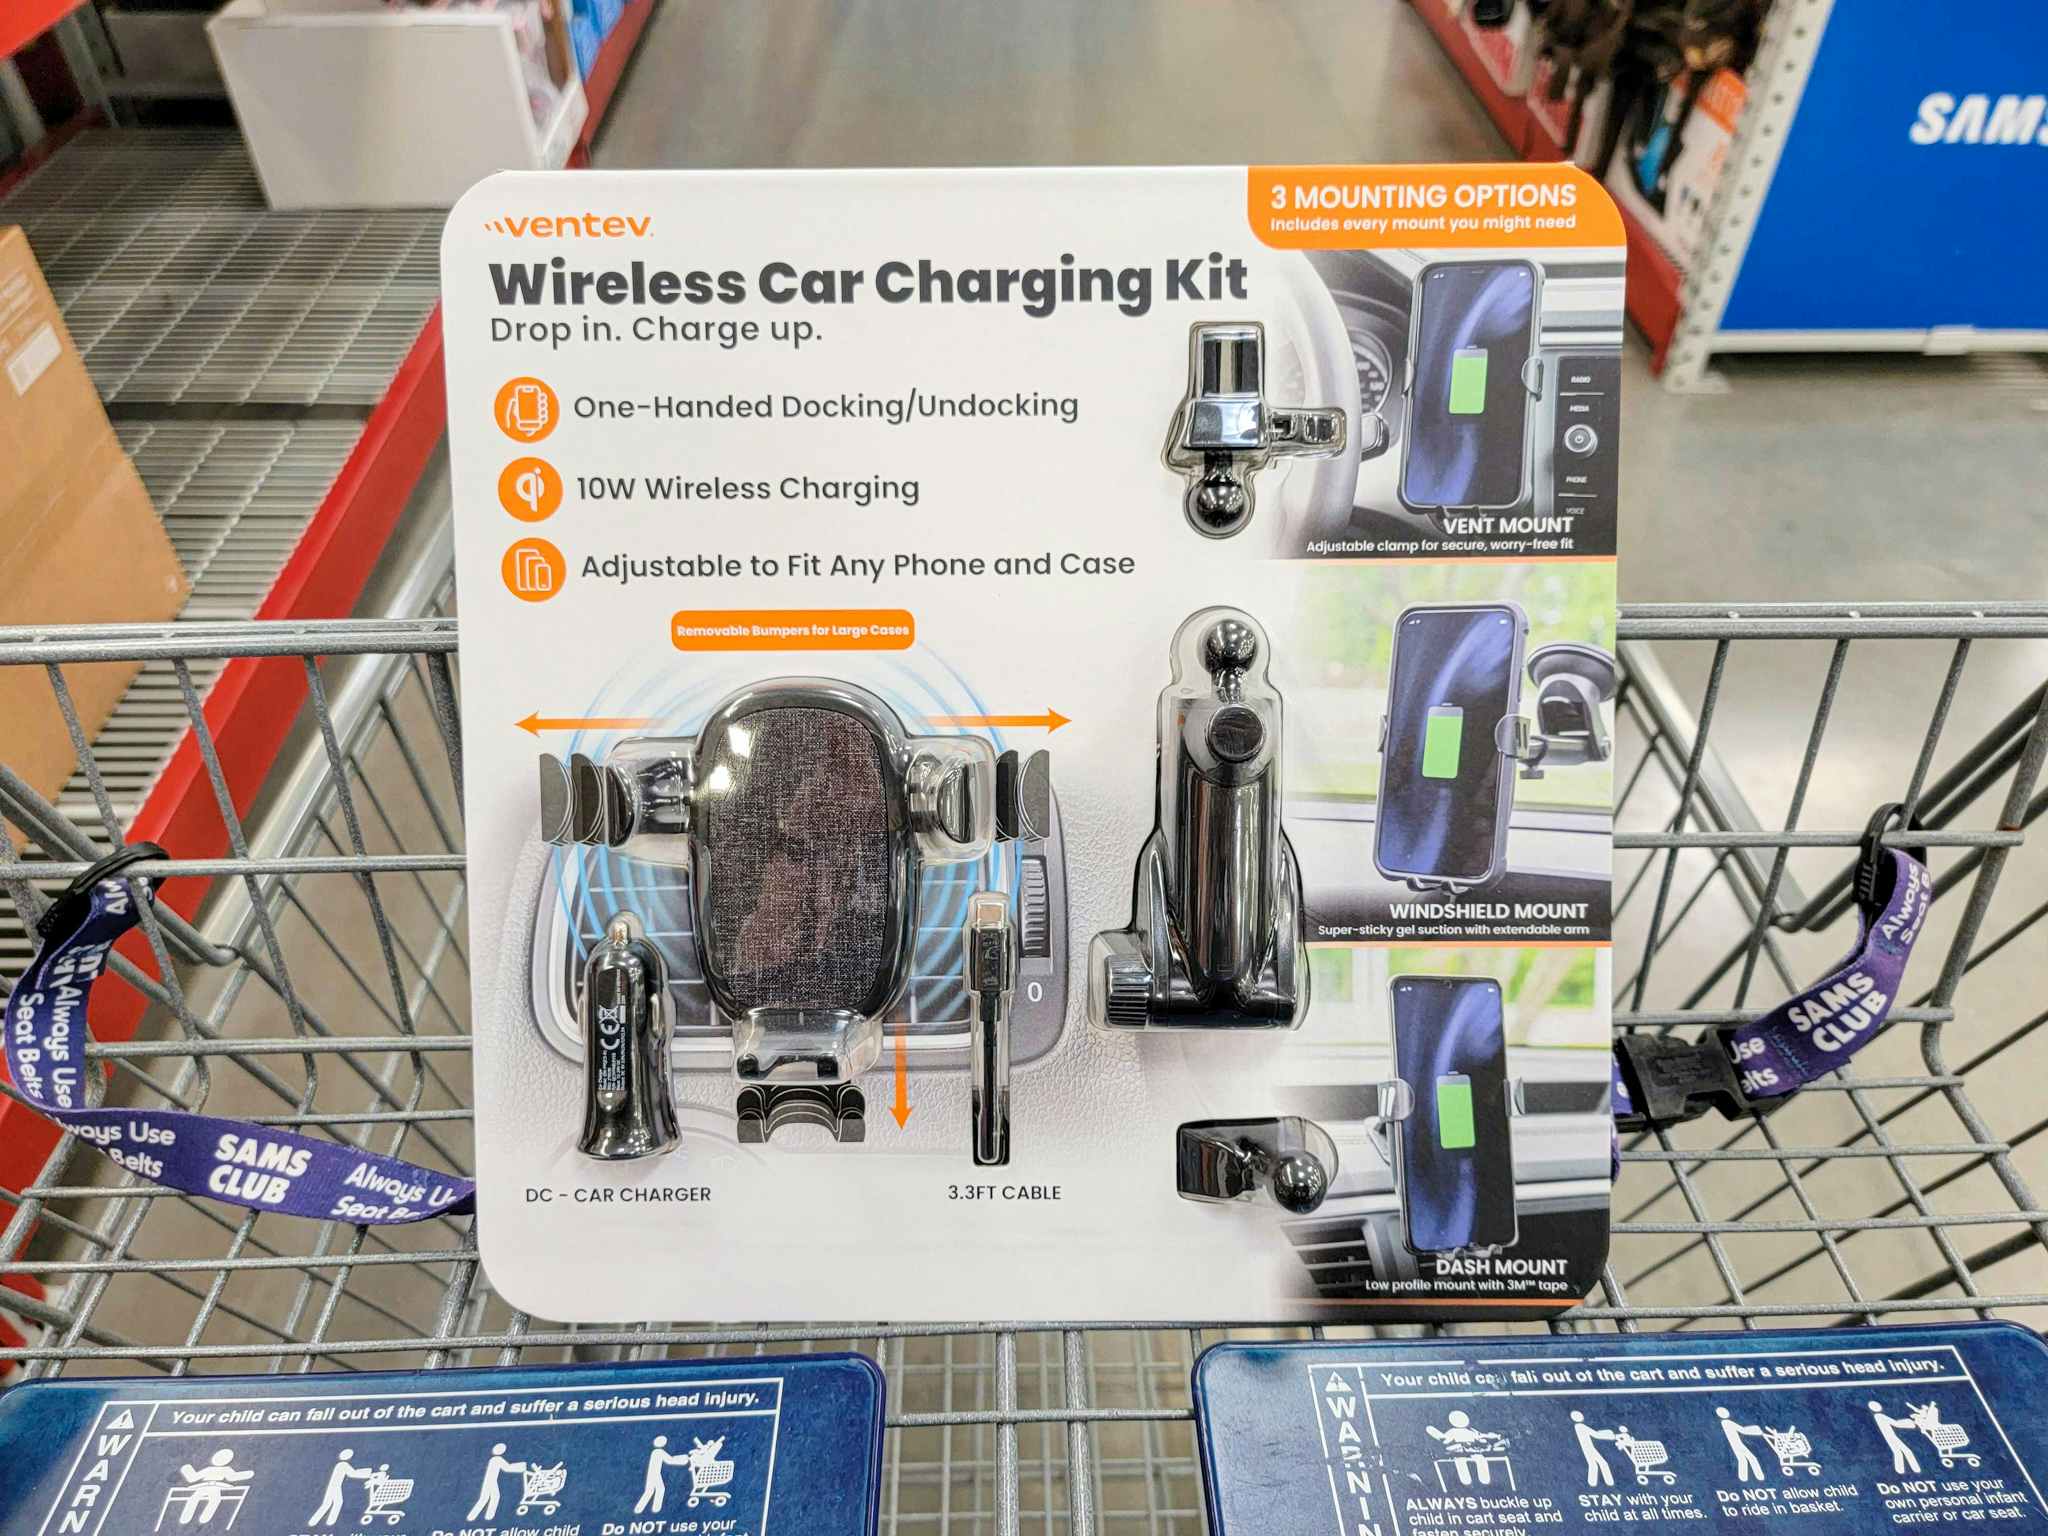 wireless car charging kit in a cart